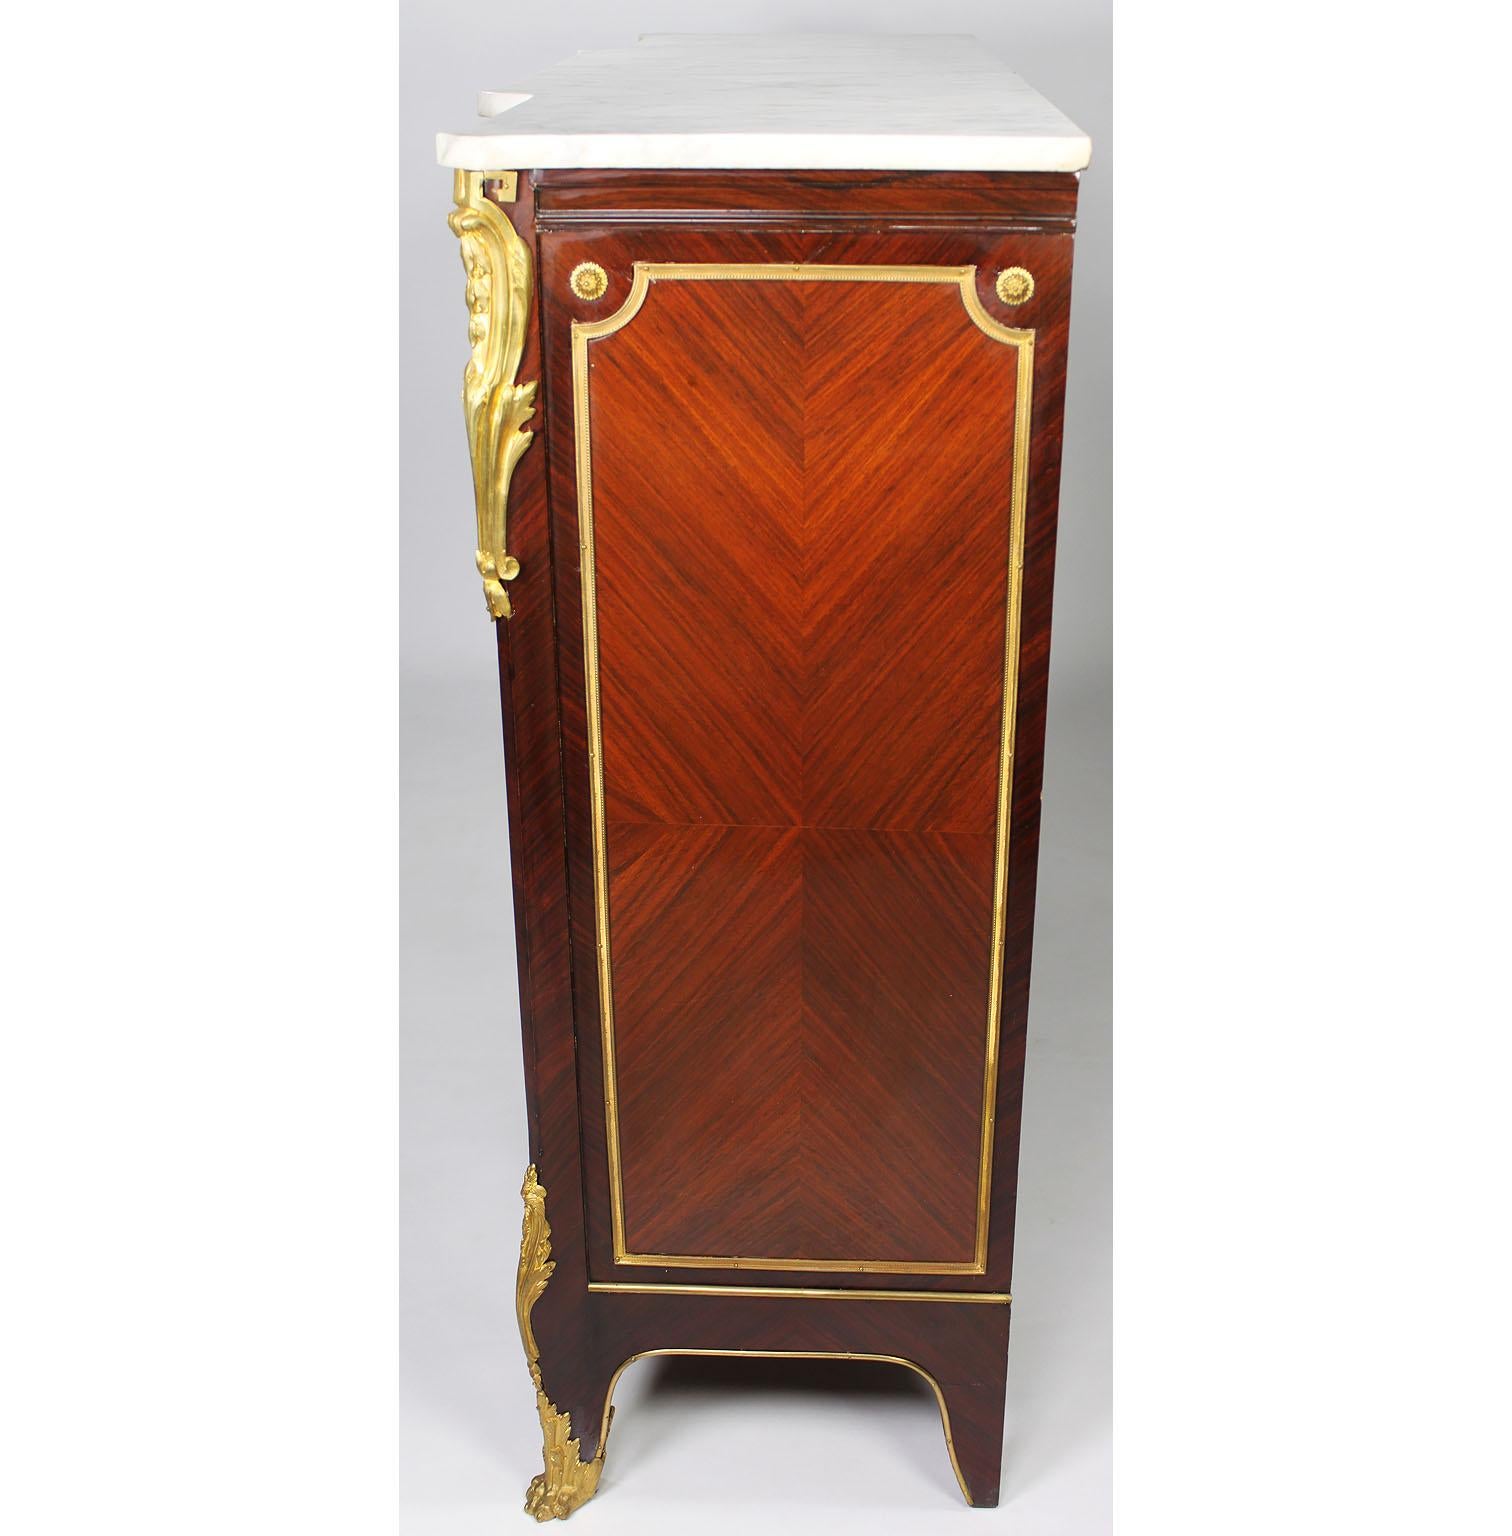 French 19th-20th Century Louis XV Style Tulipwood & Gilt-Bronze Mounted Cabinet For Sale 1